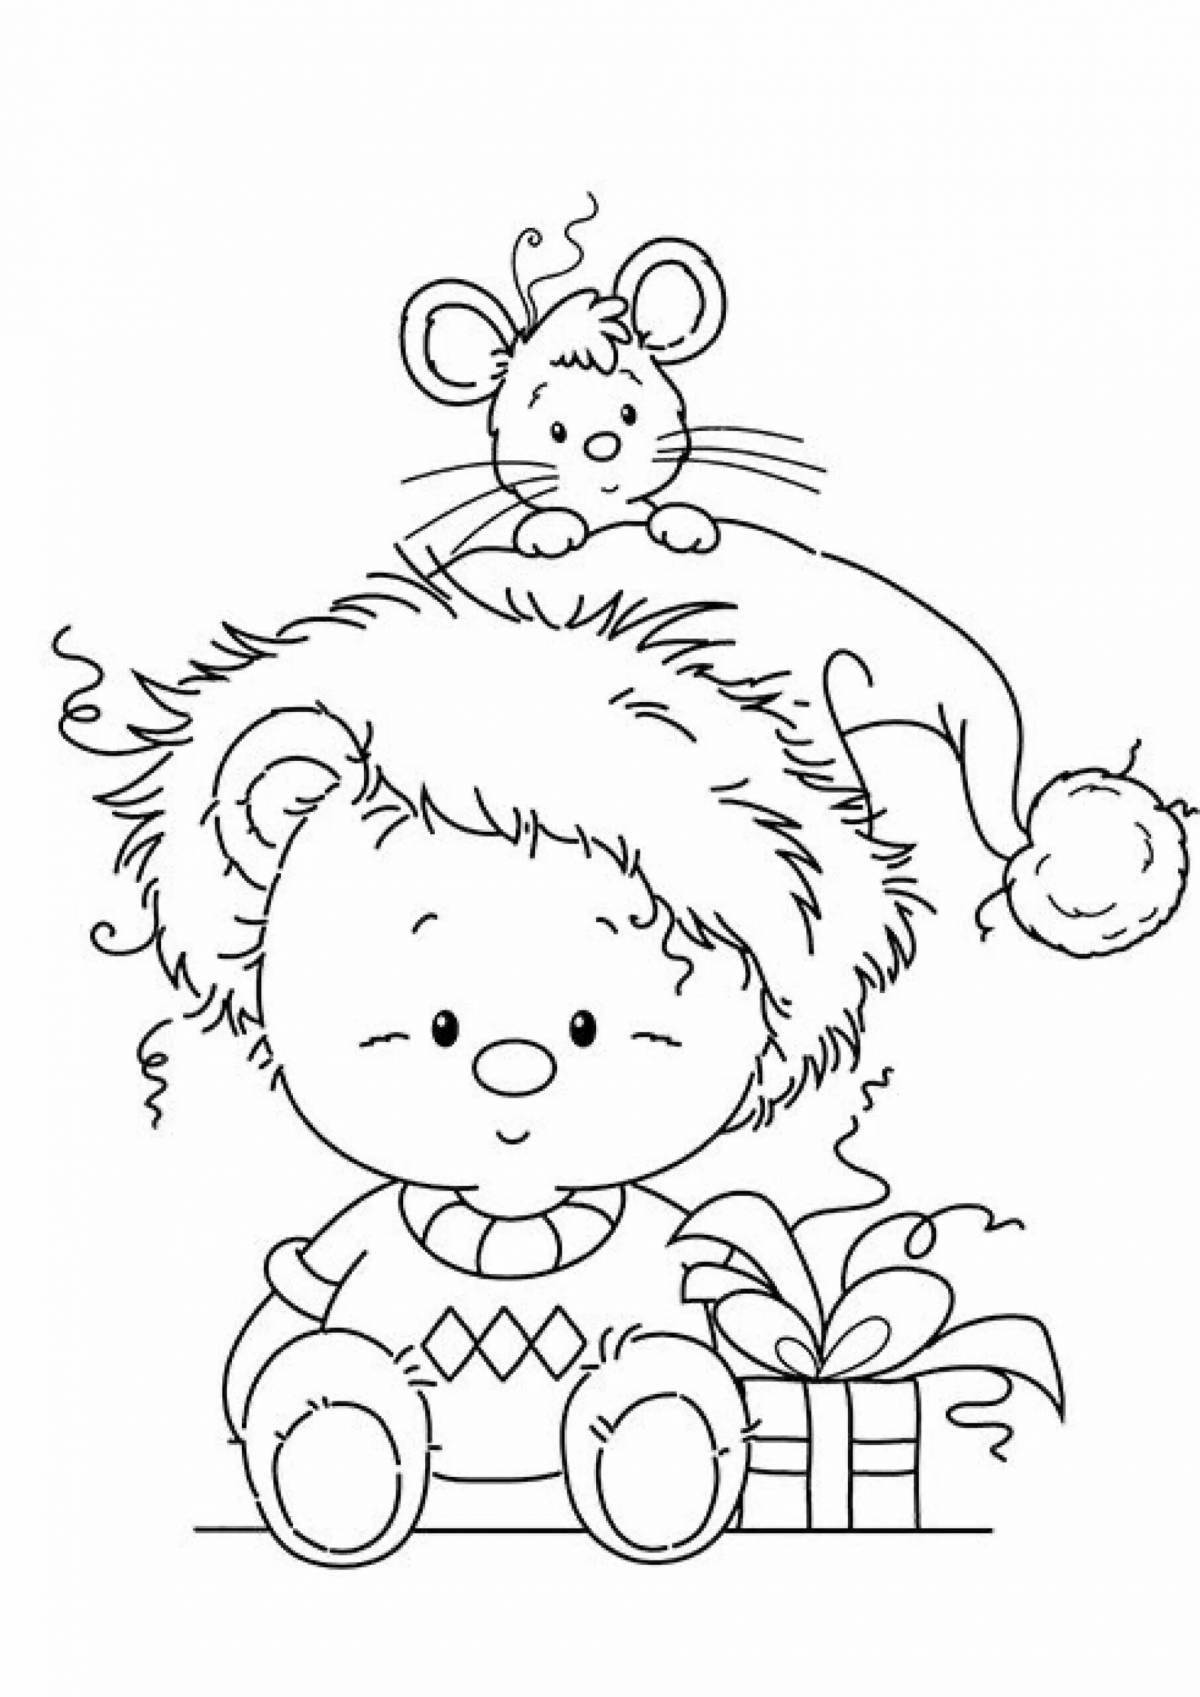 Fancy Christmas bear coloring page